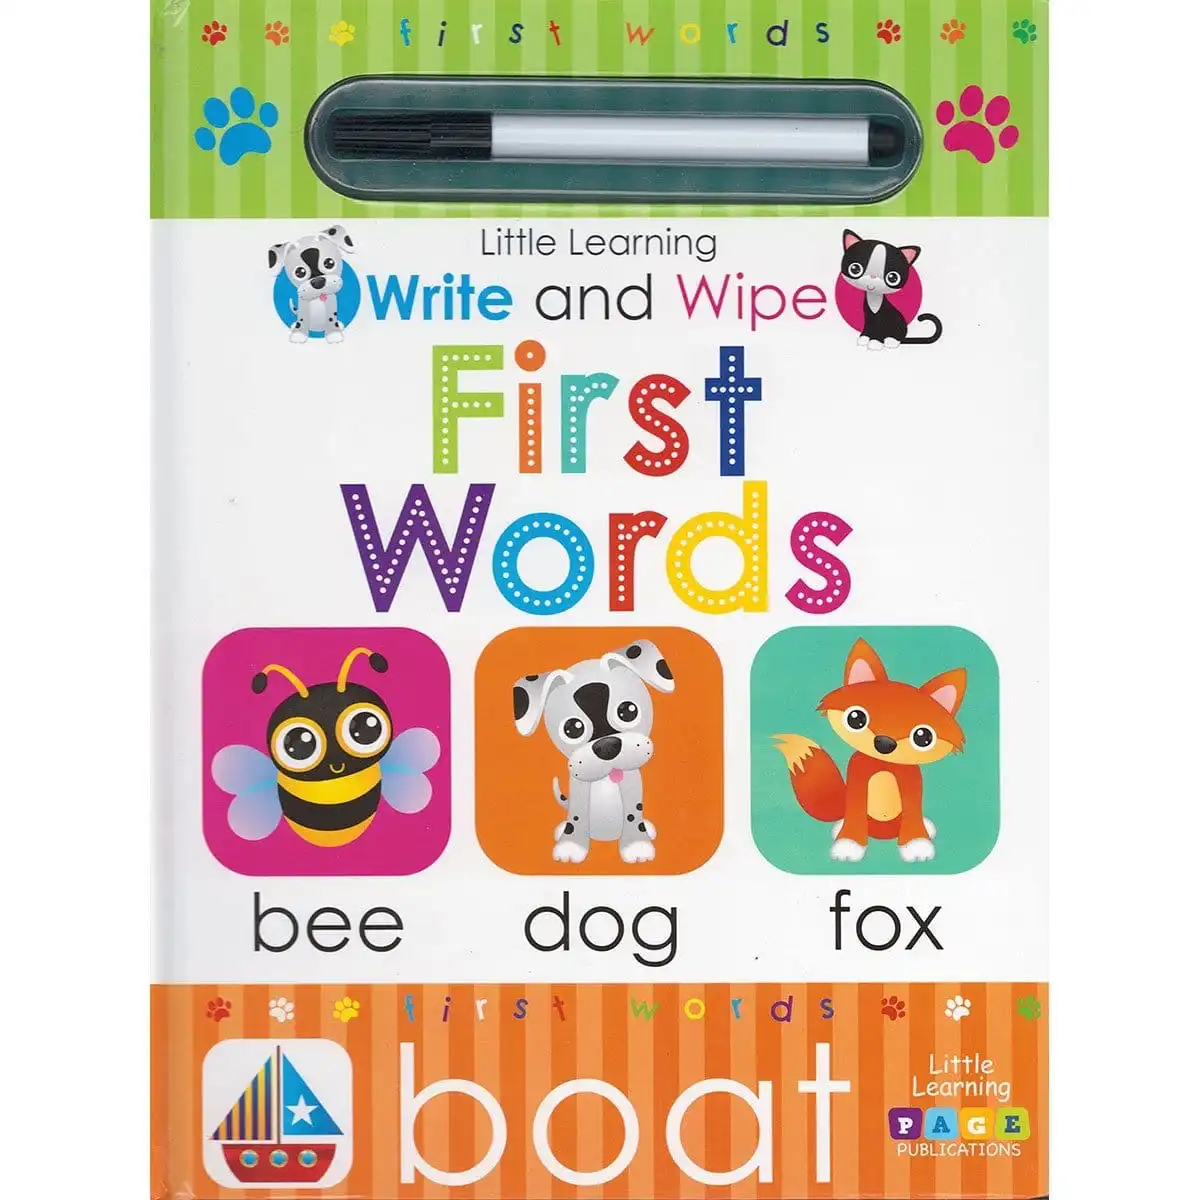 Little Learning: Write and Wipe: First Words